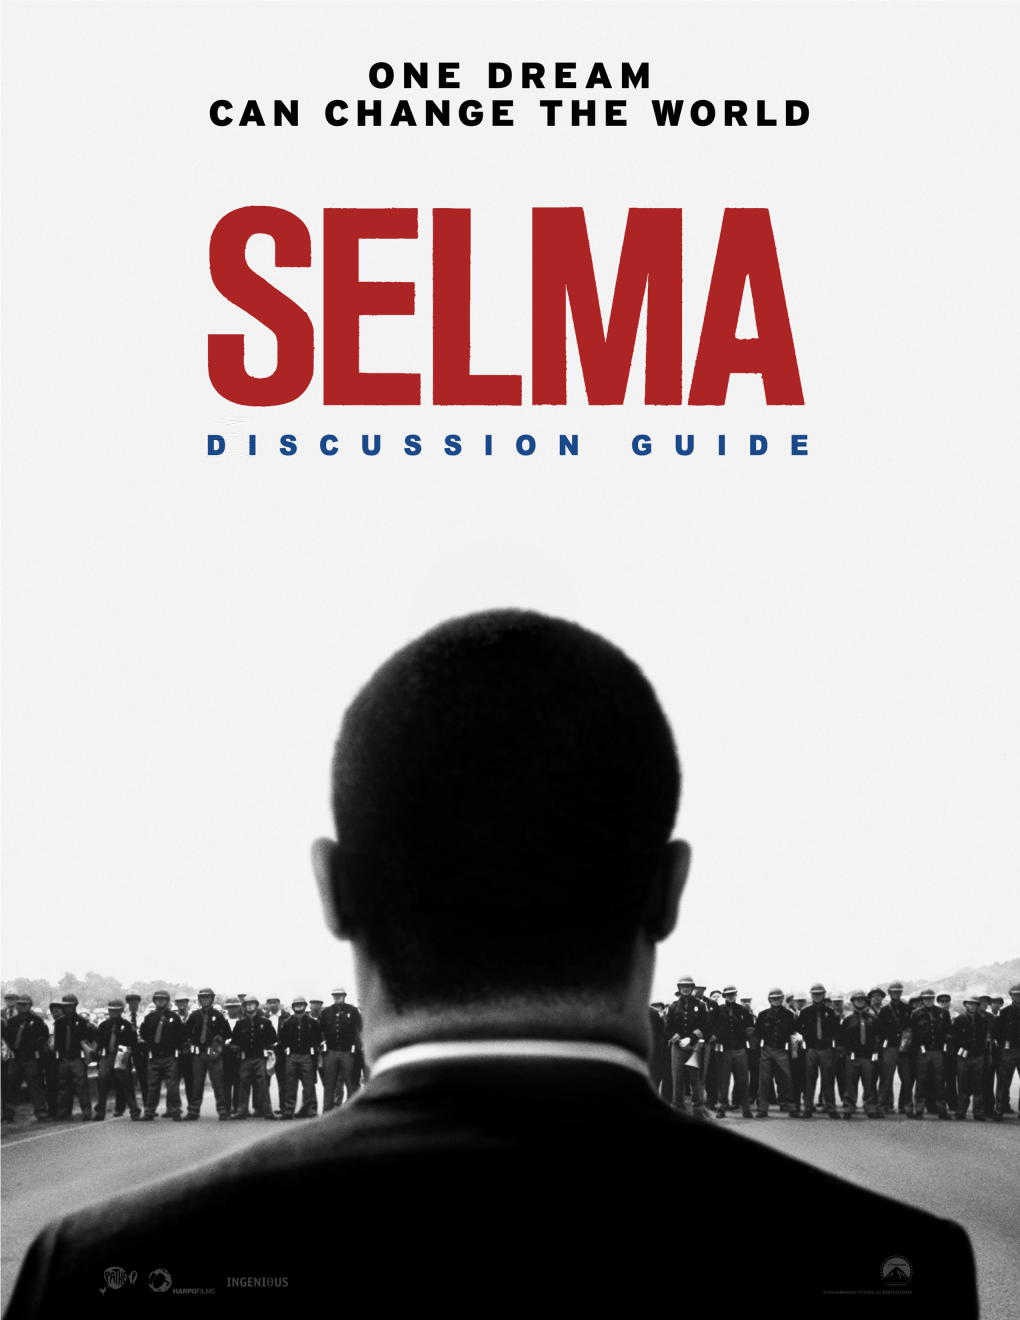 Selma, Alabama to Montgomery, Alabama on a Quest for the Basic Human Right to Vote